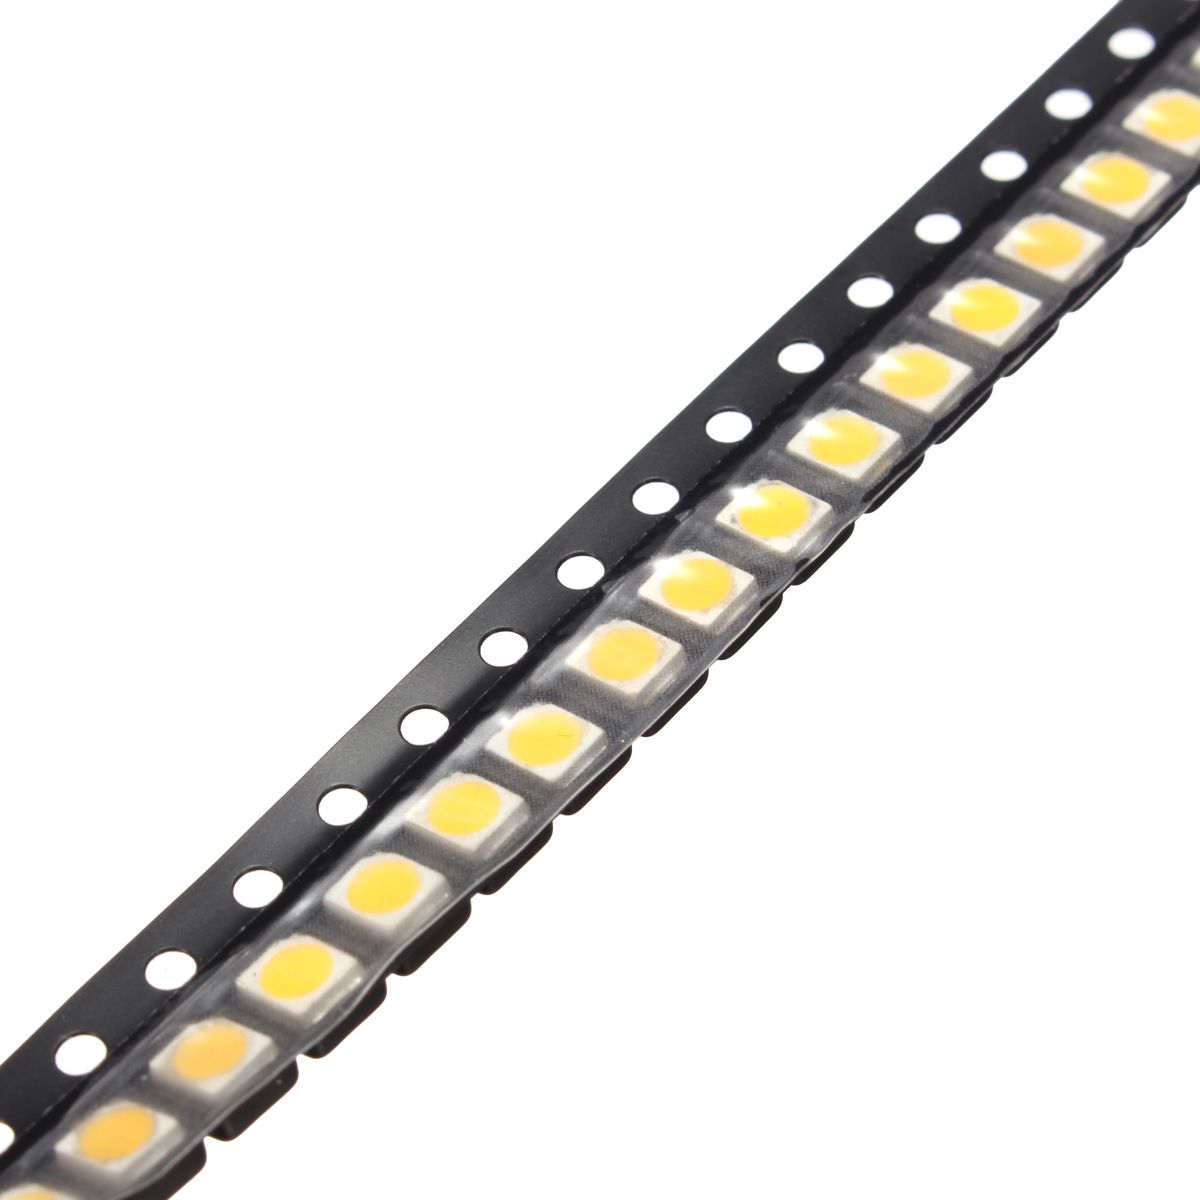 100PCS-SMD3528-1210-1W-100LM-Warm-White-LED-Backlight-DIY-Chip-Bead-For-TV-Application-1128676